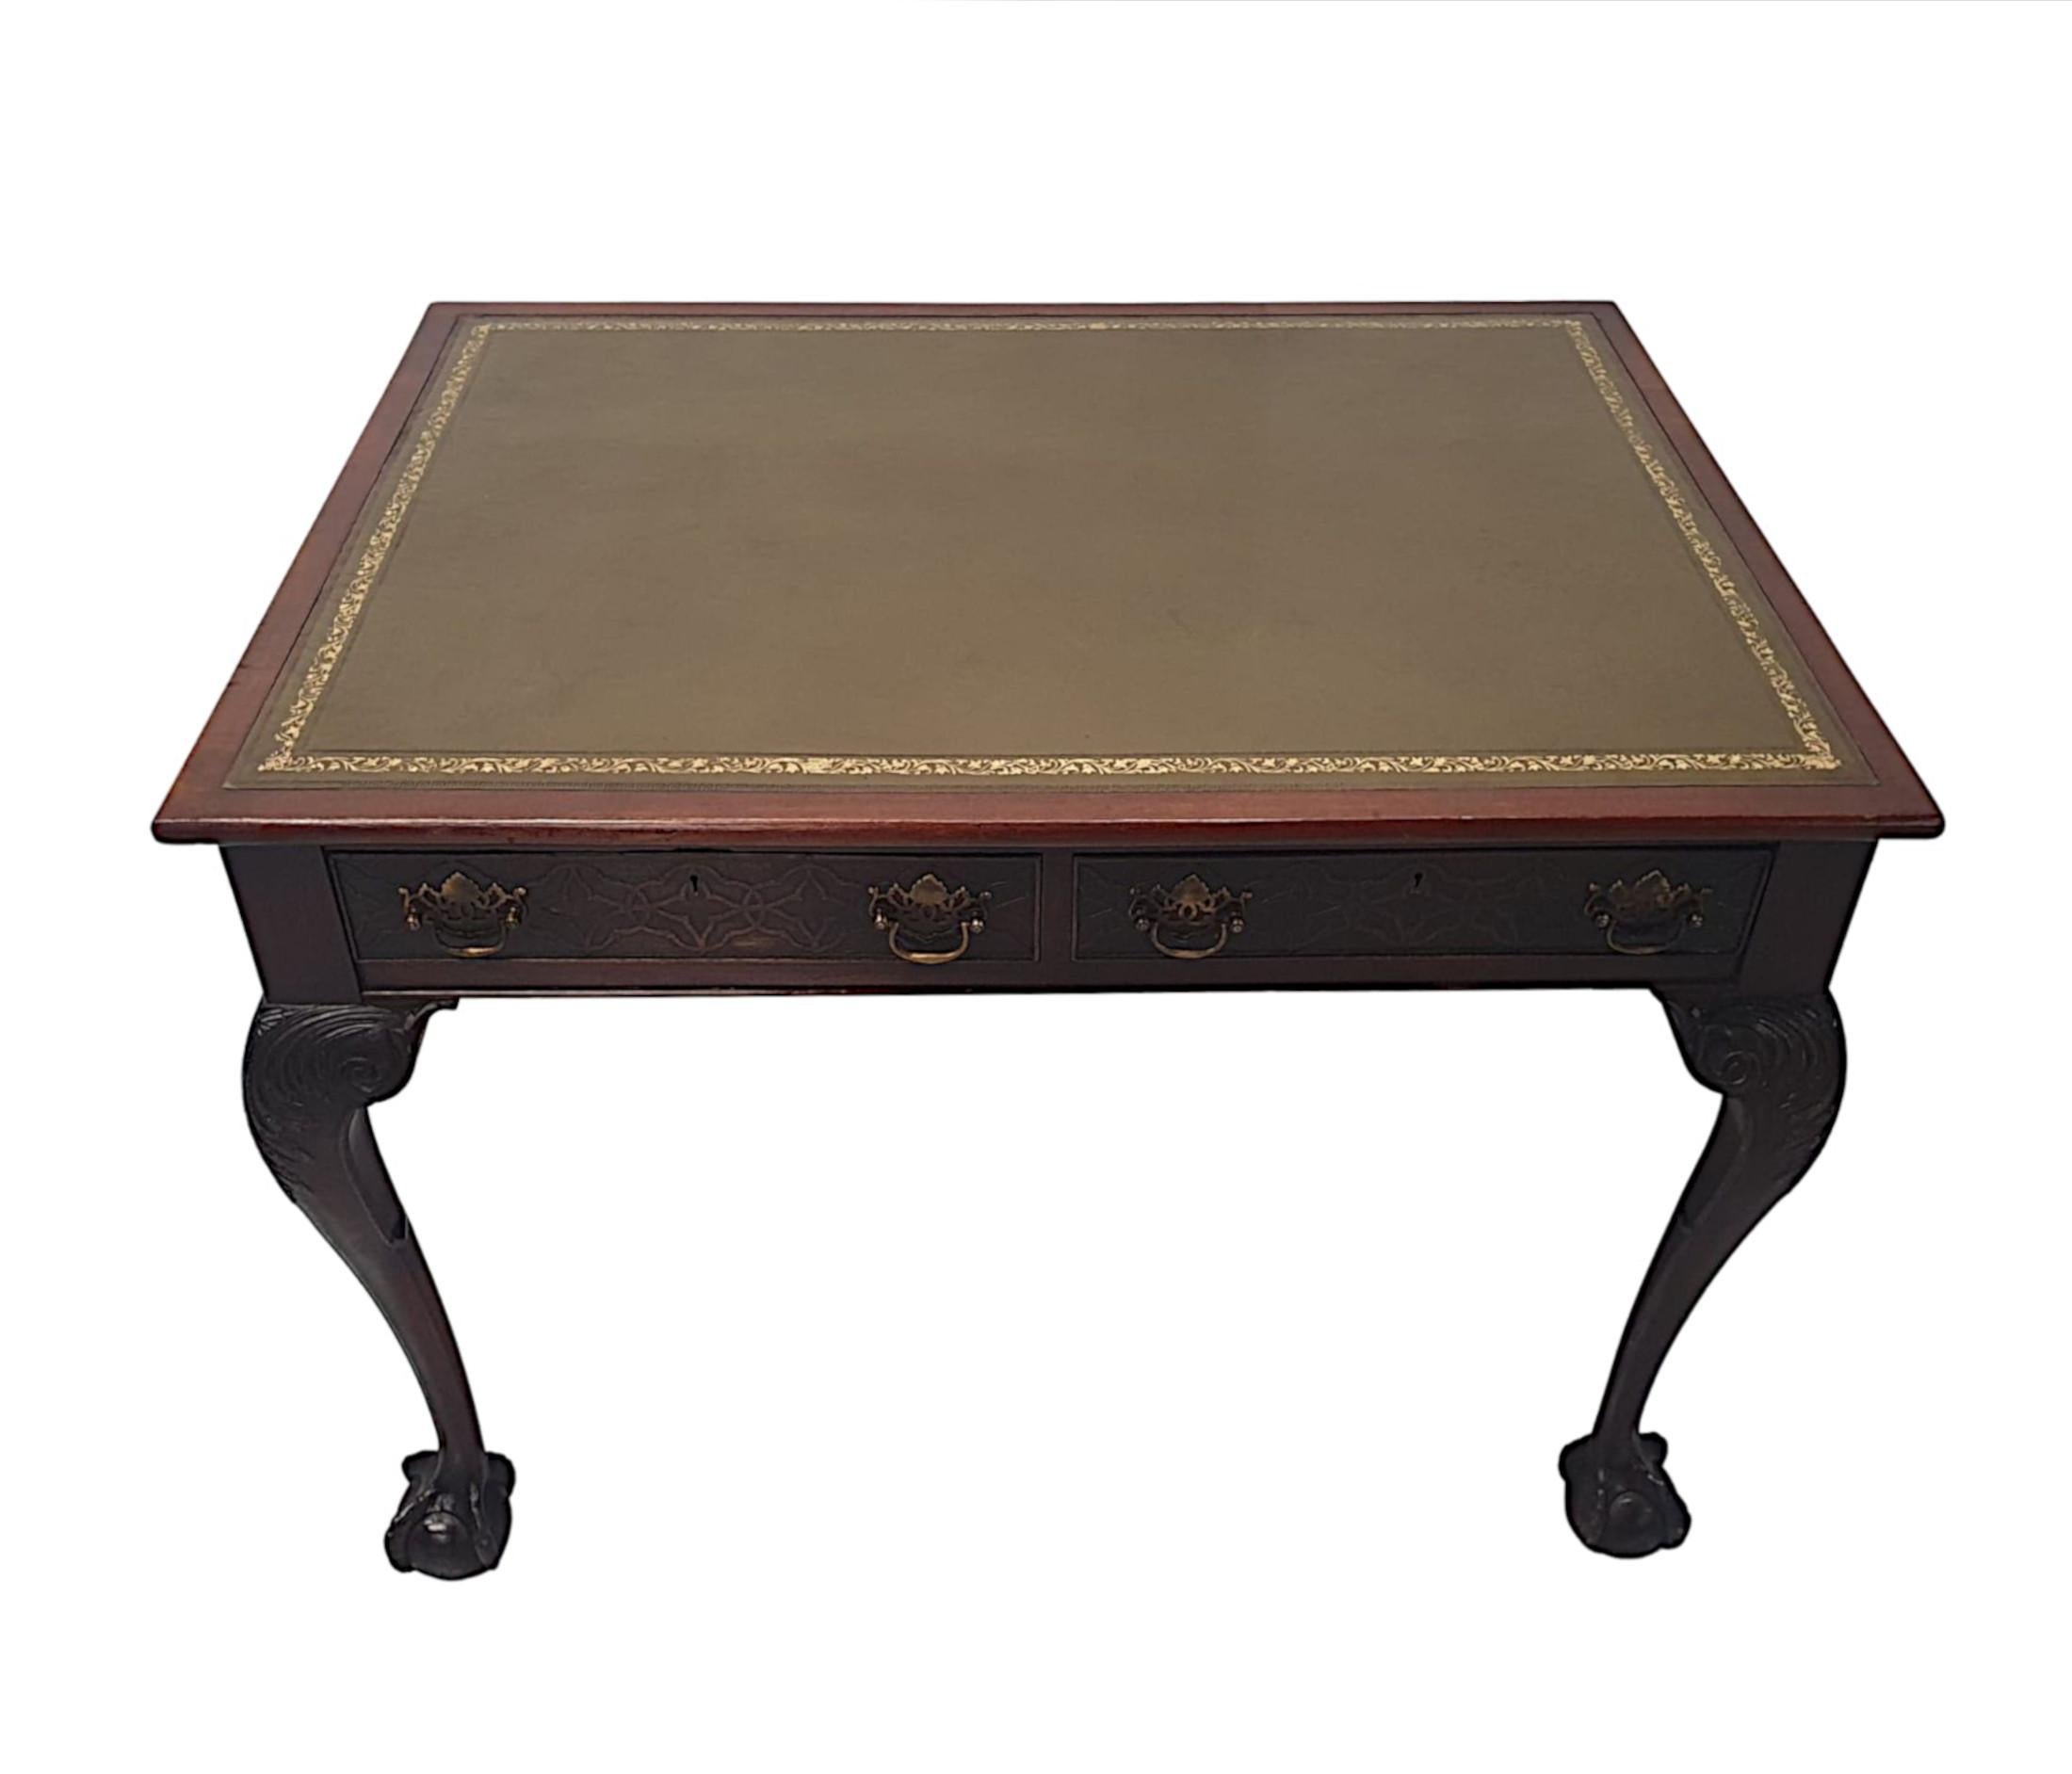 Stunning Late 19th Century Desk in the Thomas Chippendale Manner For Sale 5